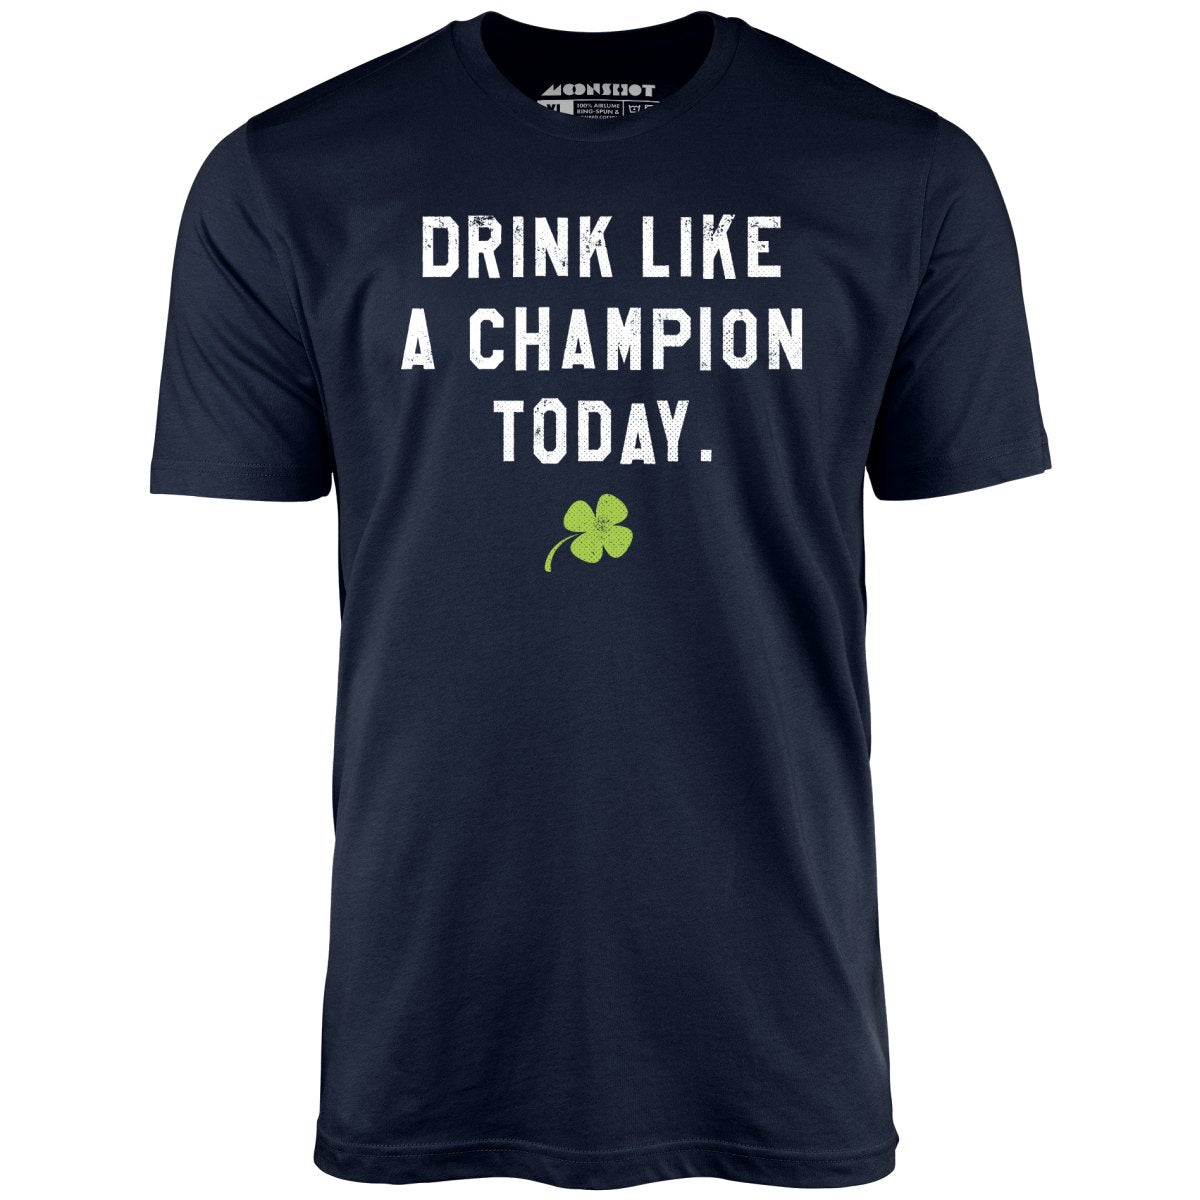 Drink Like a Champion Today - Unisex T-Shirt